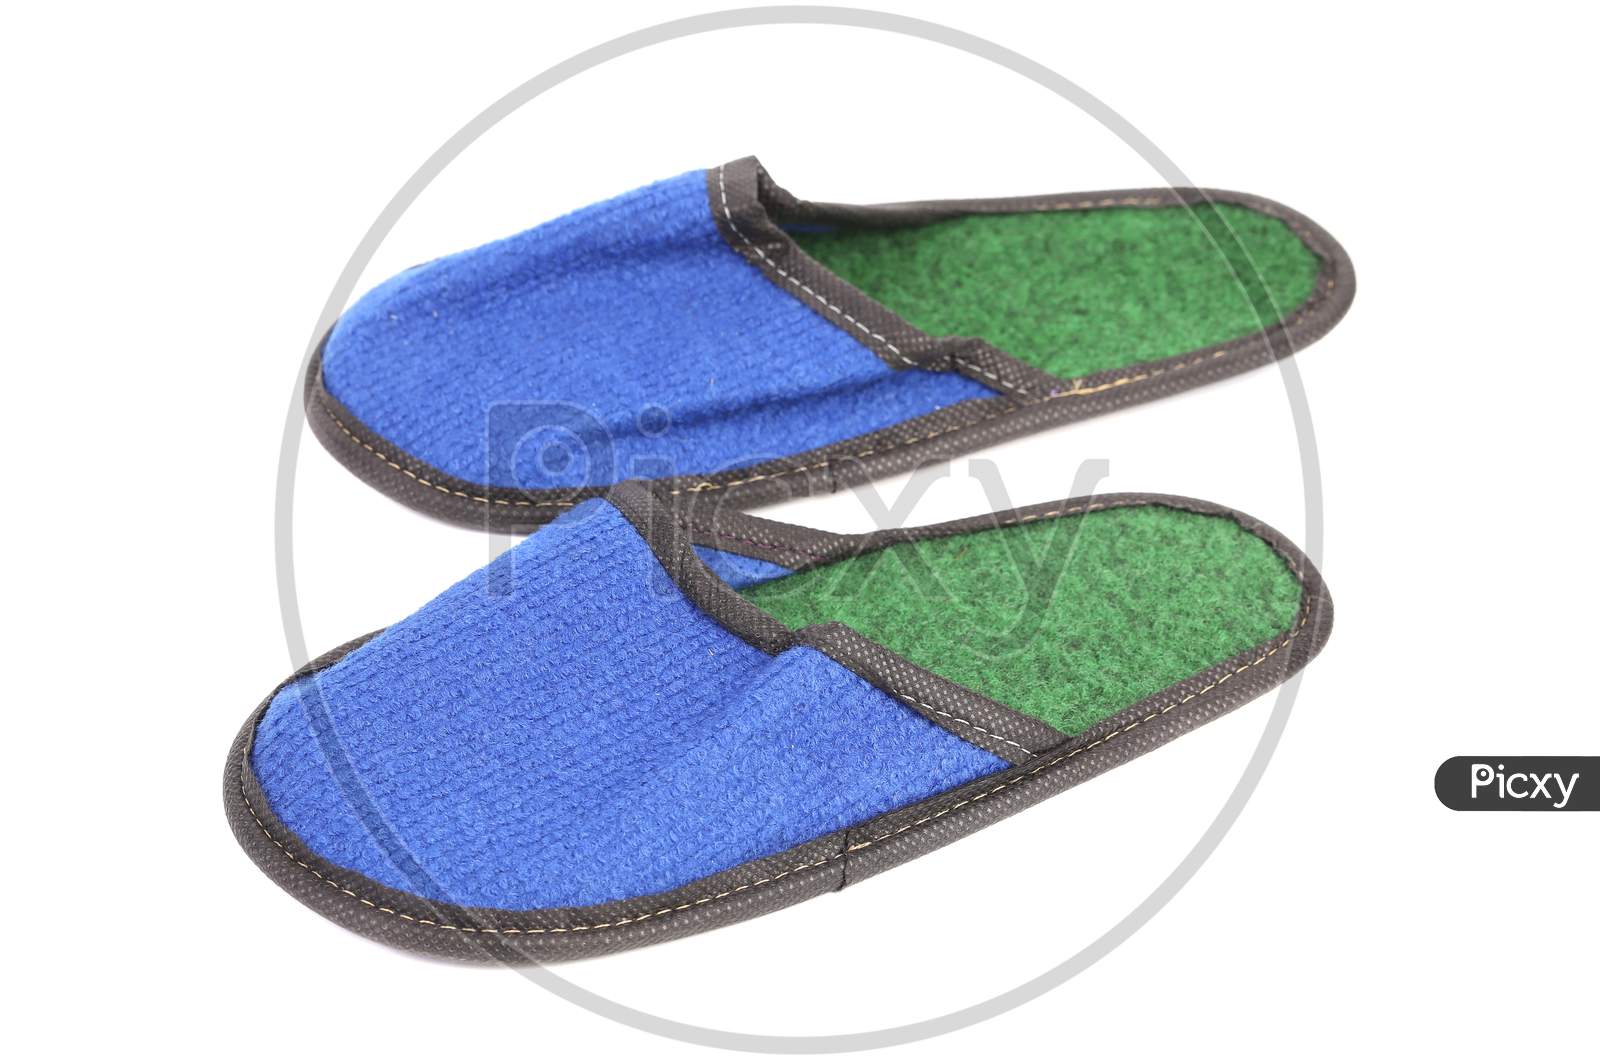 Bright Pair Of Blue Slippers. Isolated On A White Background.